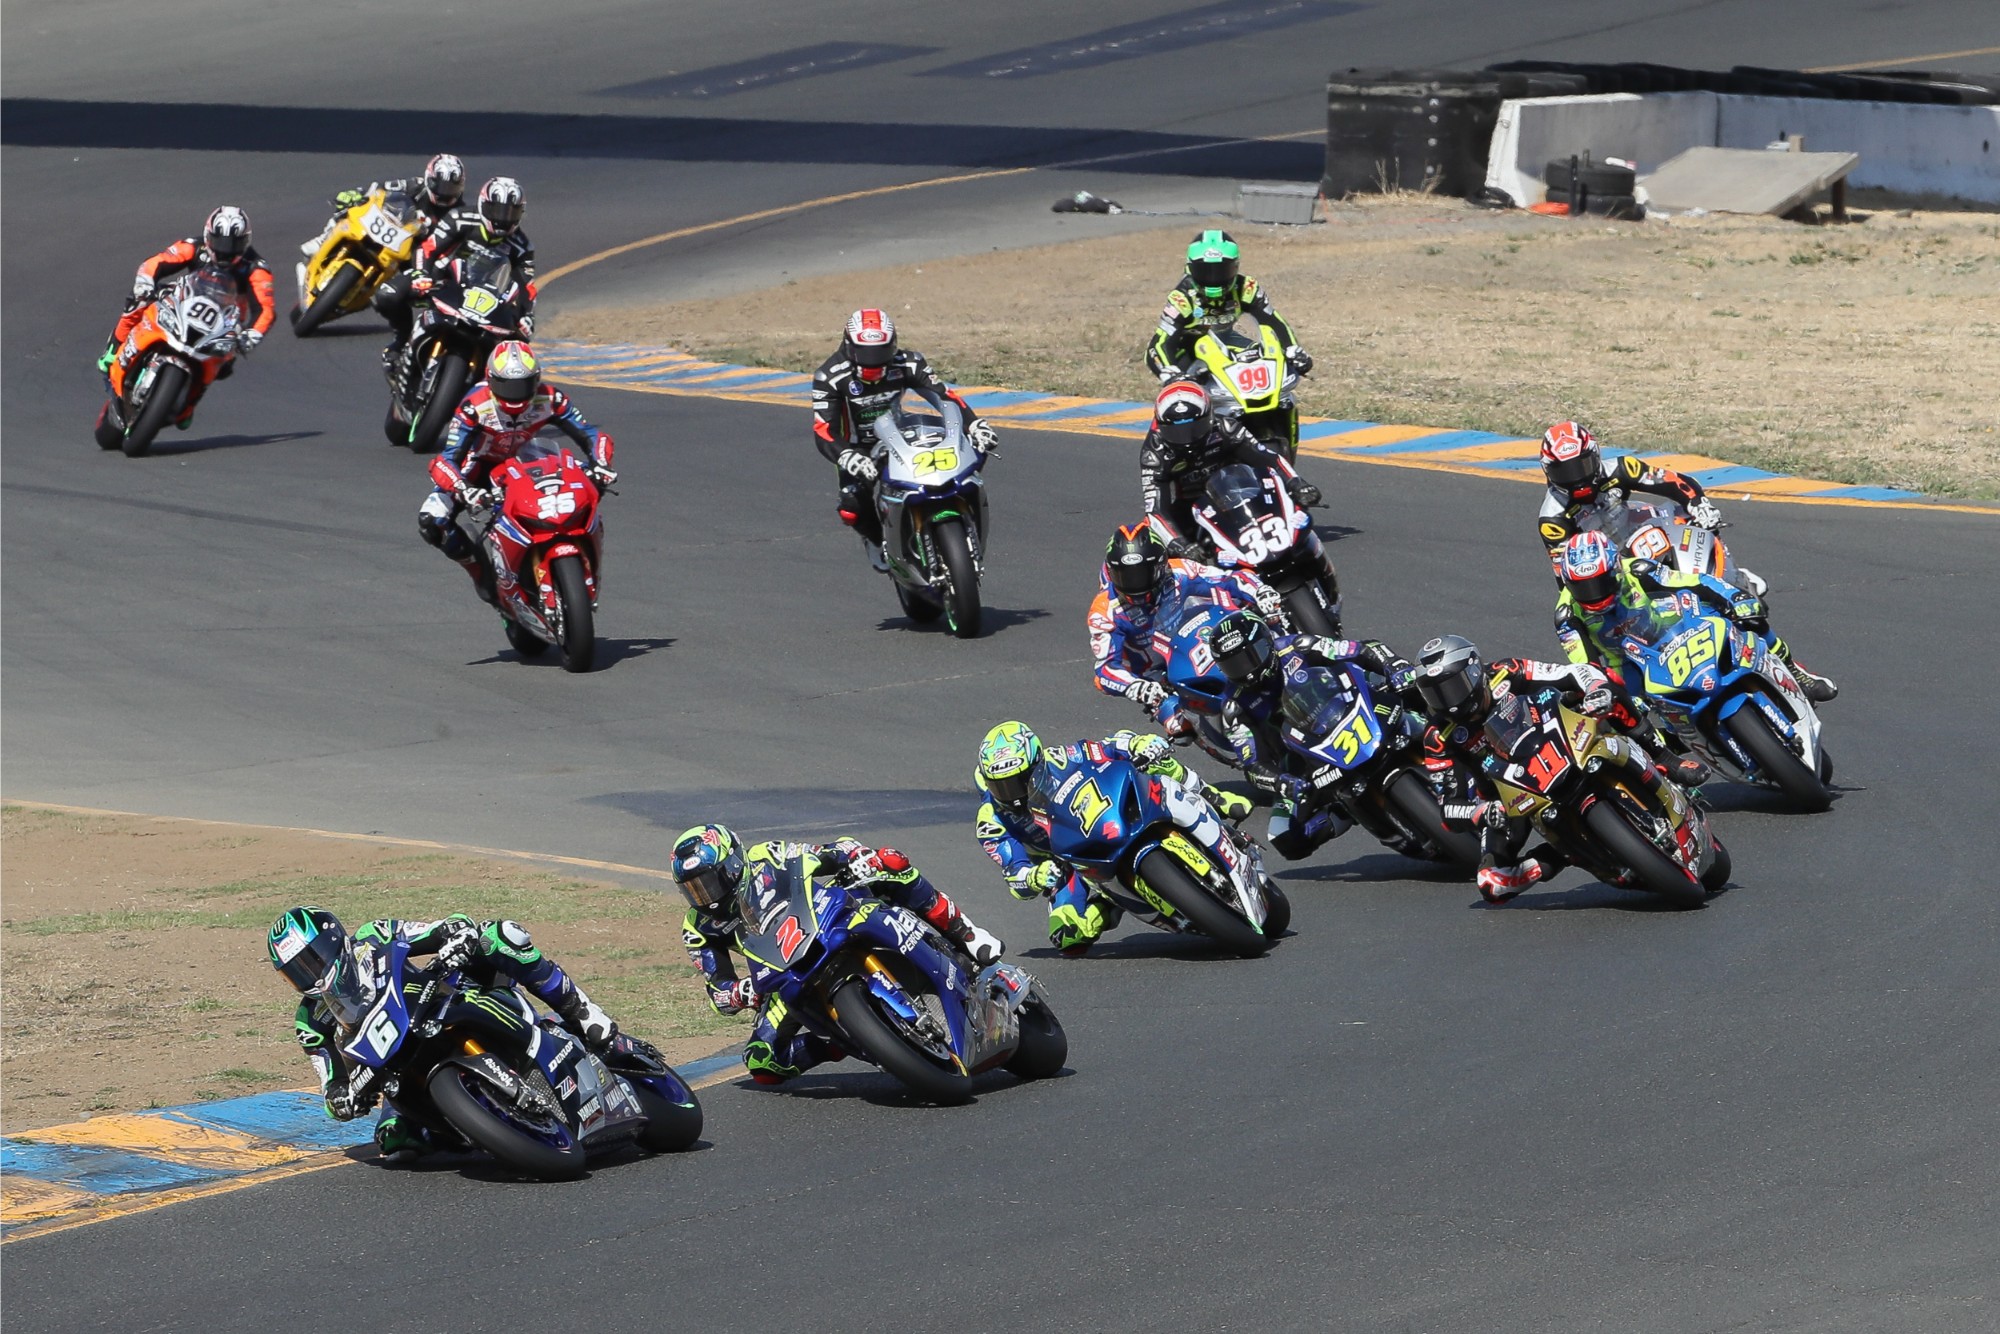 MotoAmerica How To Follow The Action At Sonoma Raceway On Television And Via Live Streaming (Updated)